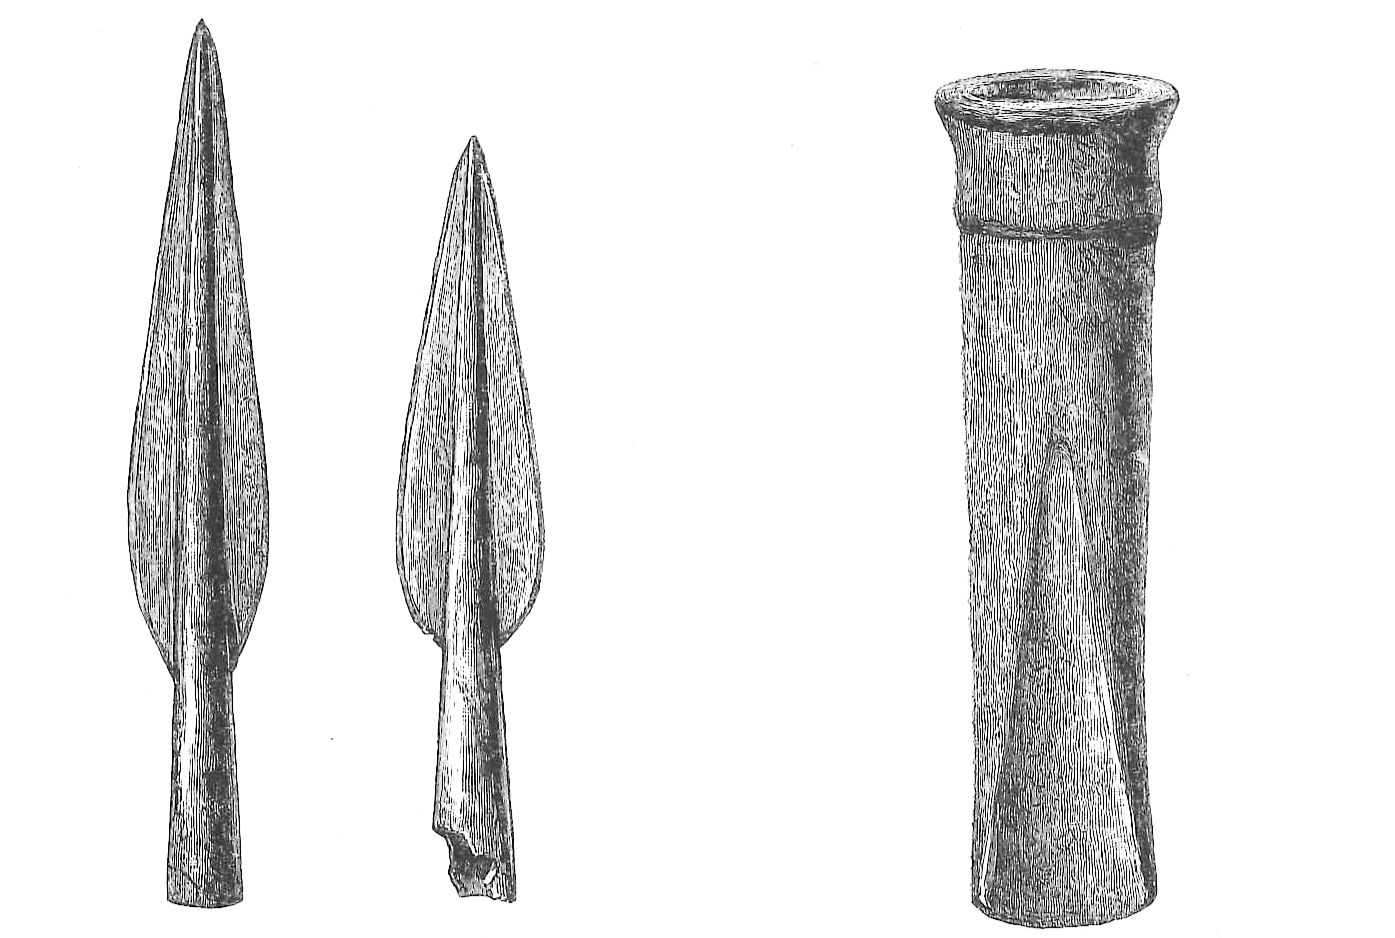 Spears And Gouge Drawing